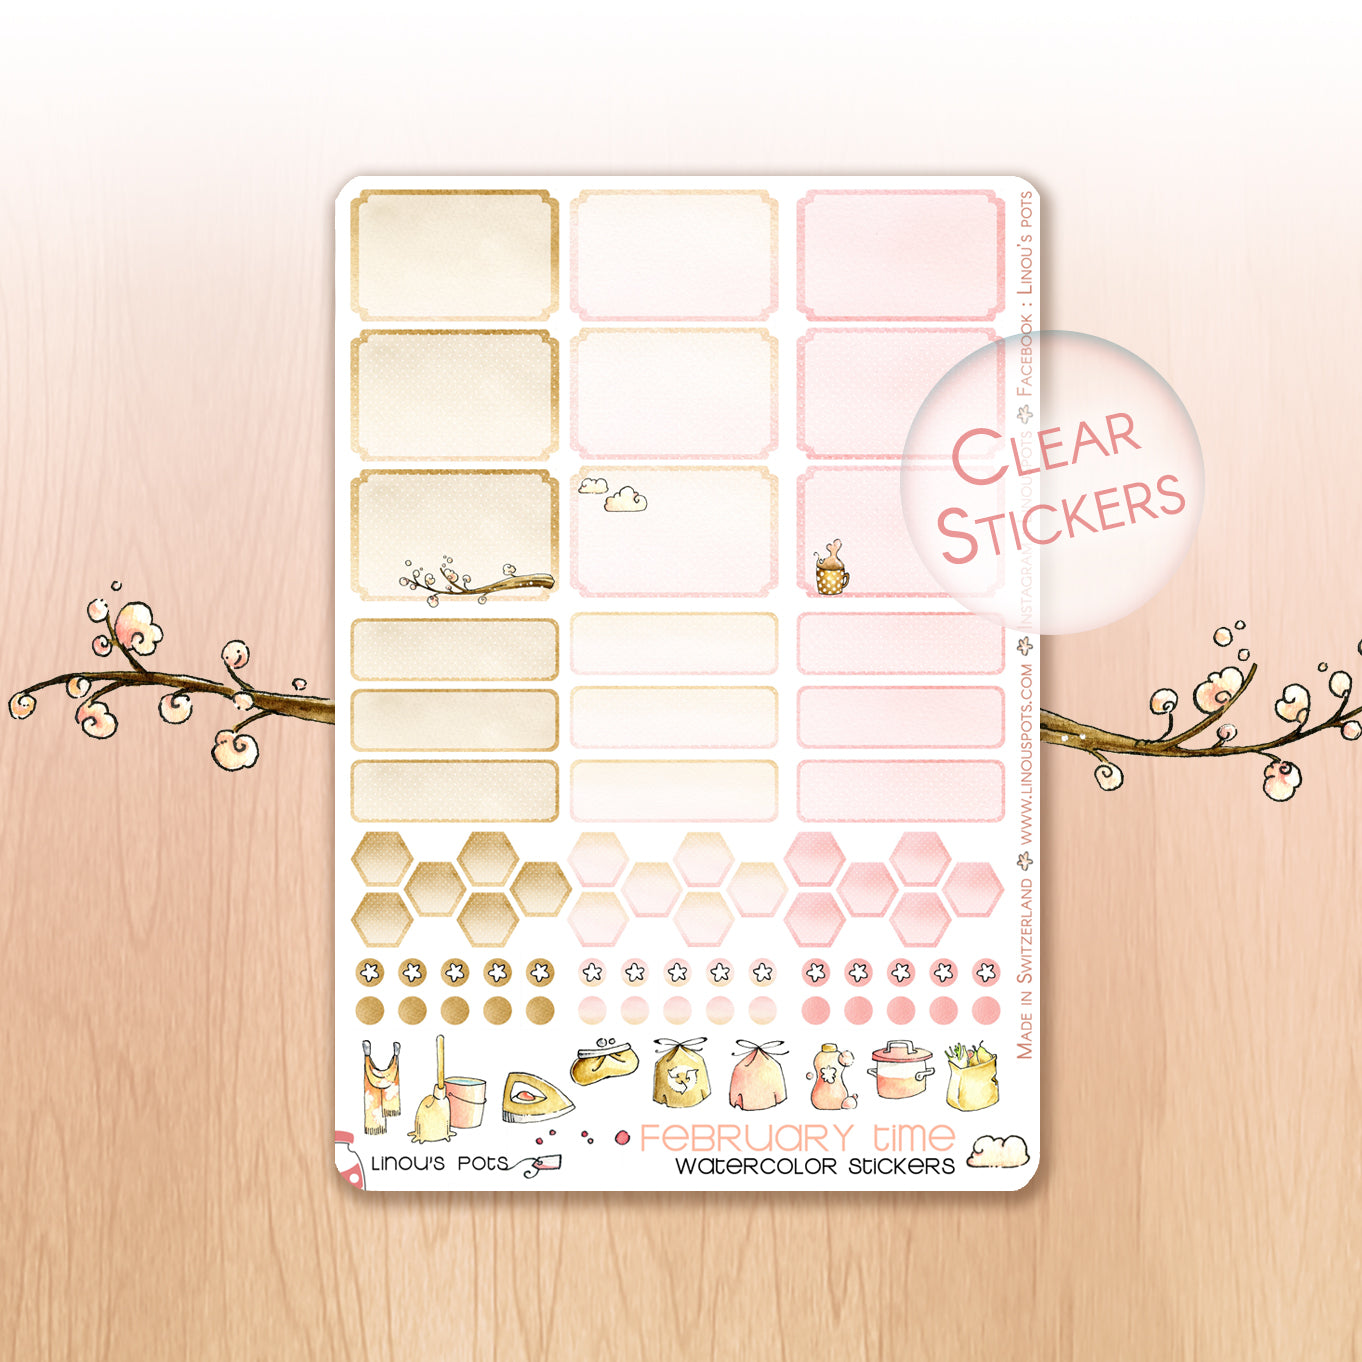 Love Is In The Air - Watercolor Planner Stickers - 1,5’’ wide Hemiboxes &amp; Eventboxes